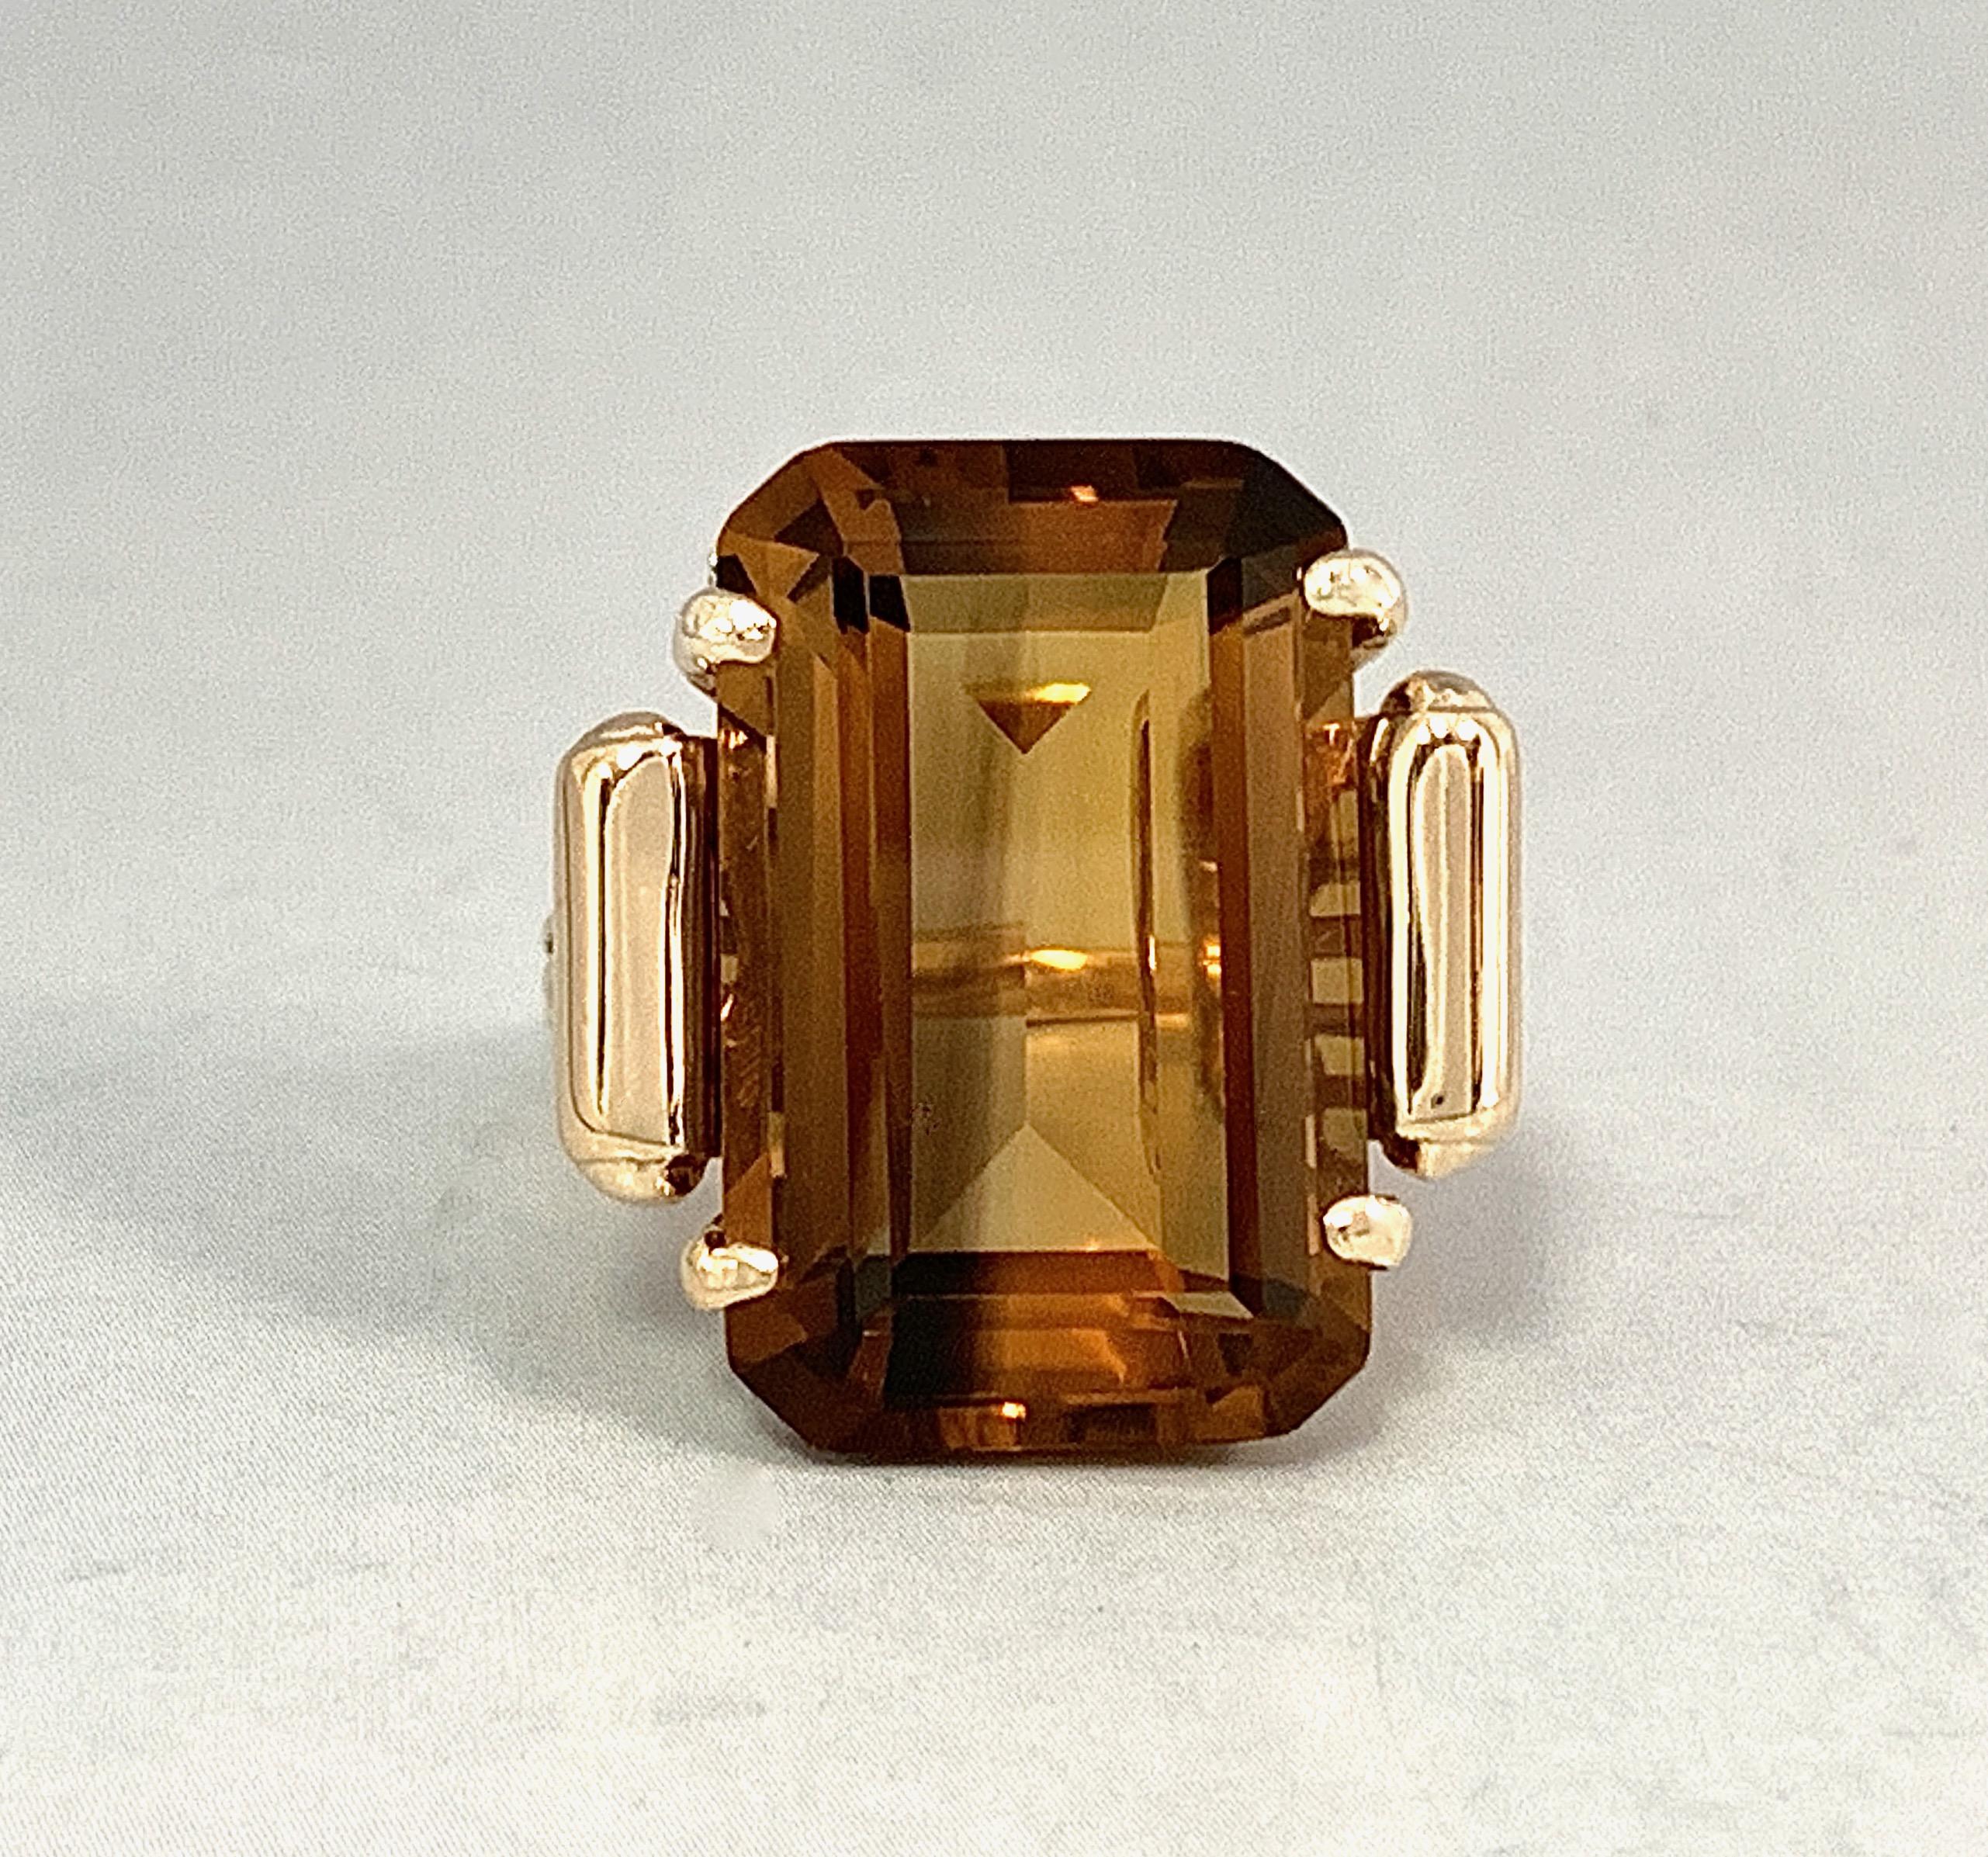 This classic 1970's cocktail ring features a gorgeous, clean and newly polished quartz, emerald cut and in an extremely unusual shade of golden honey-brown.  It probably would have been sold as a smoky quartz as that was an extremely popular stone